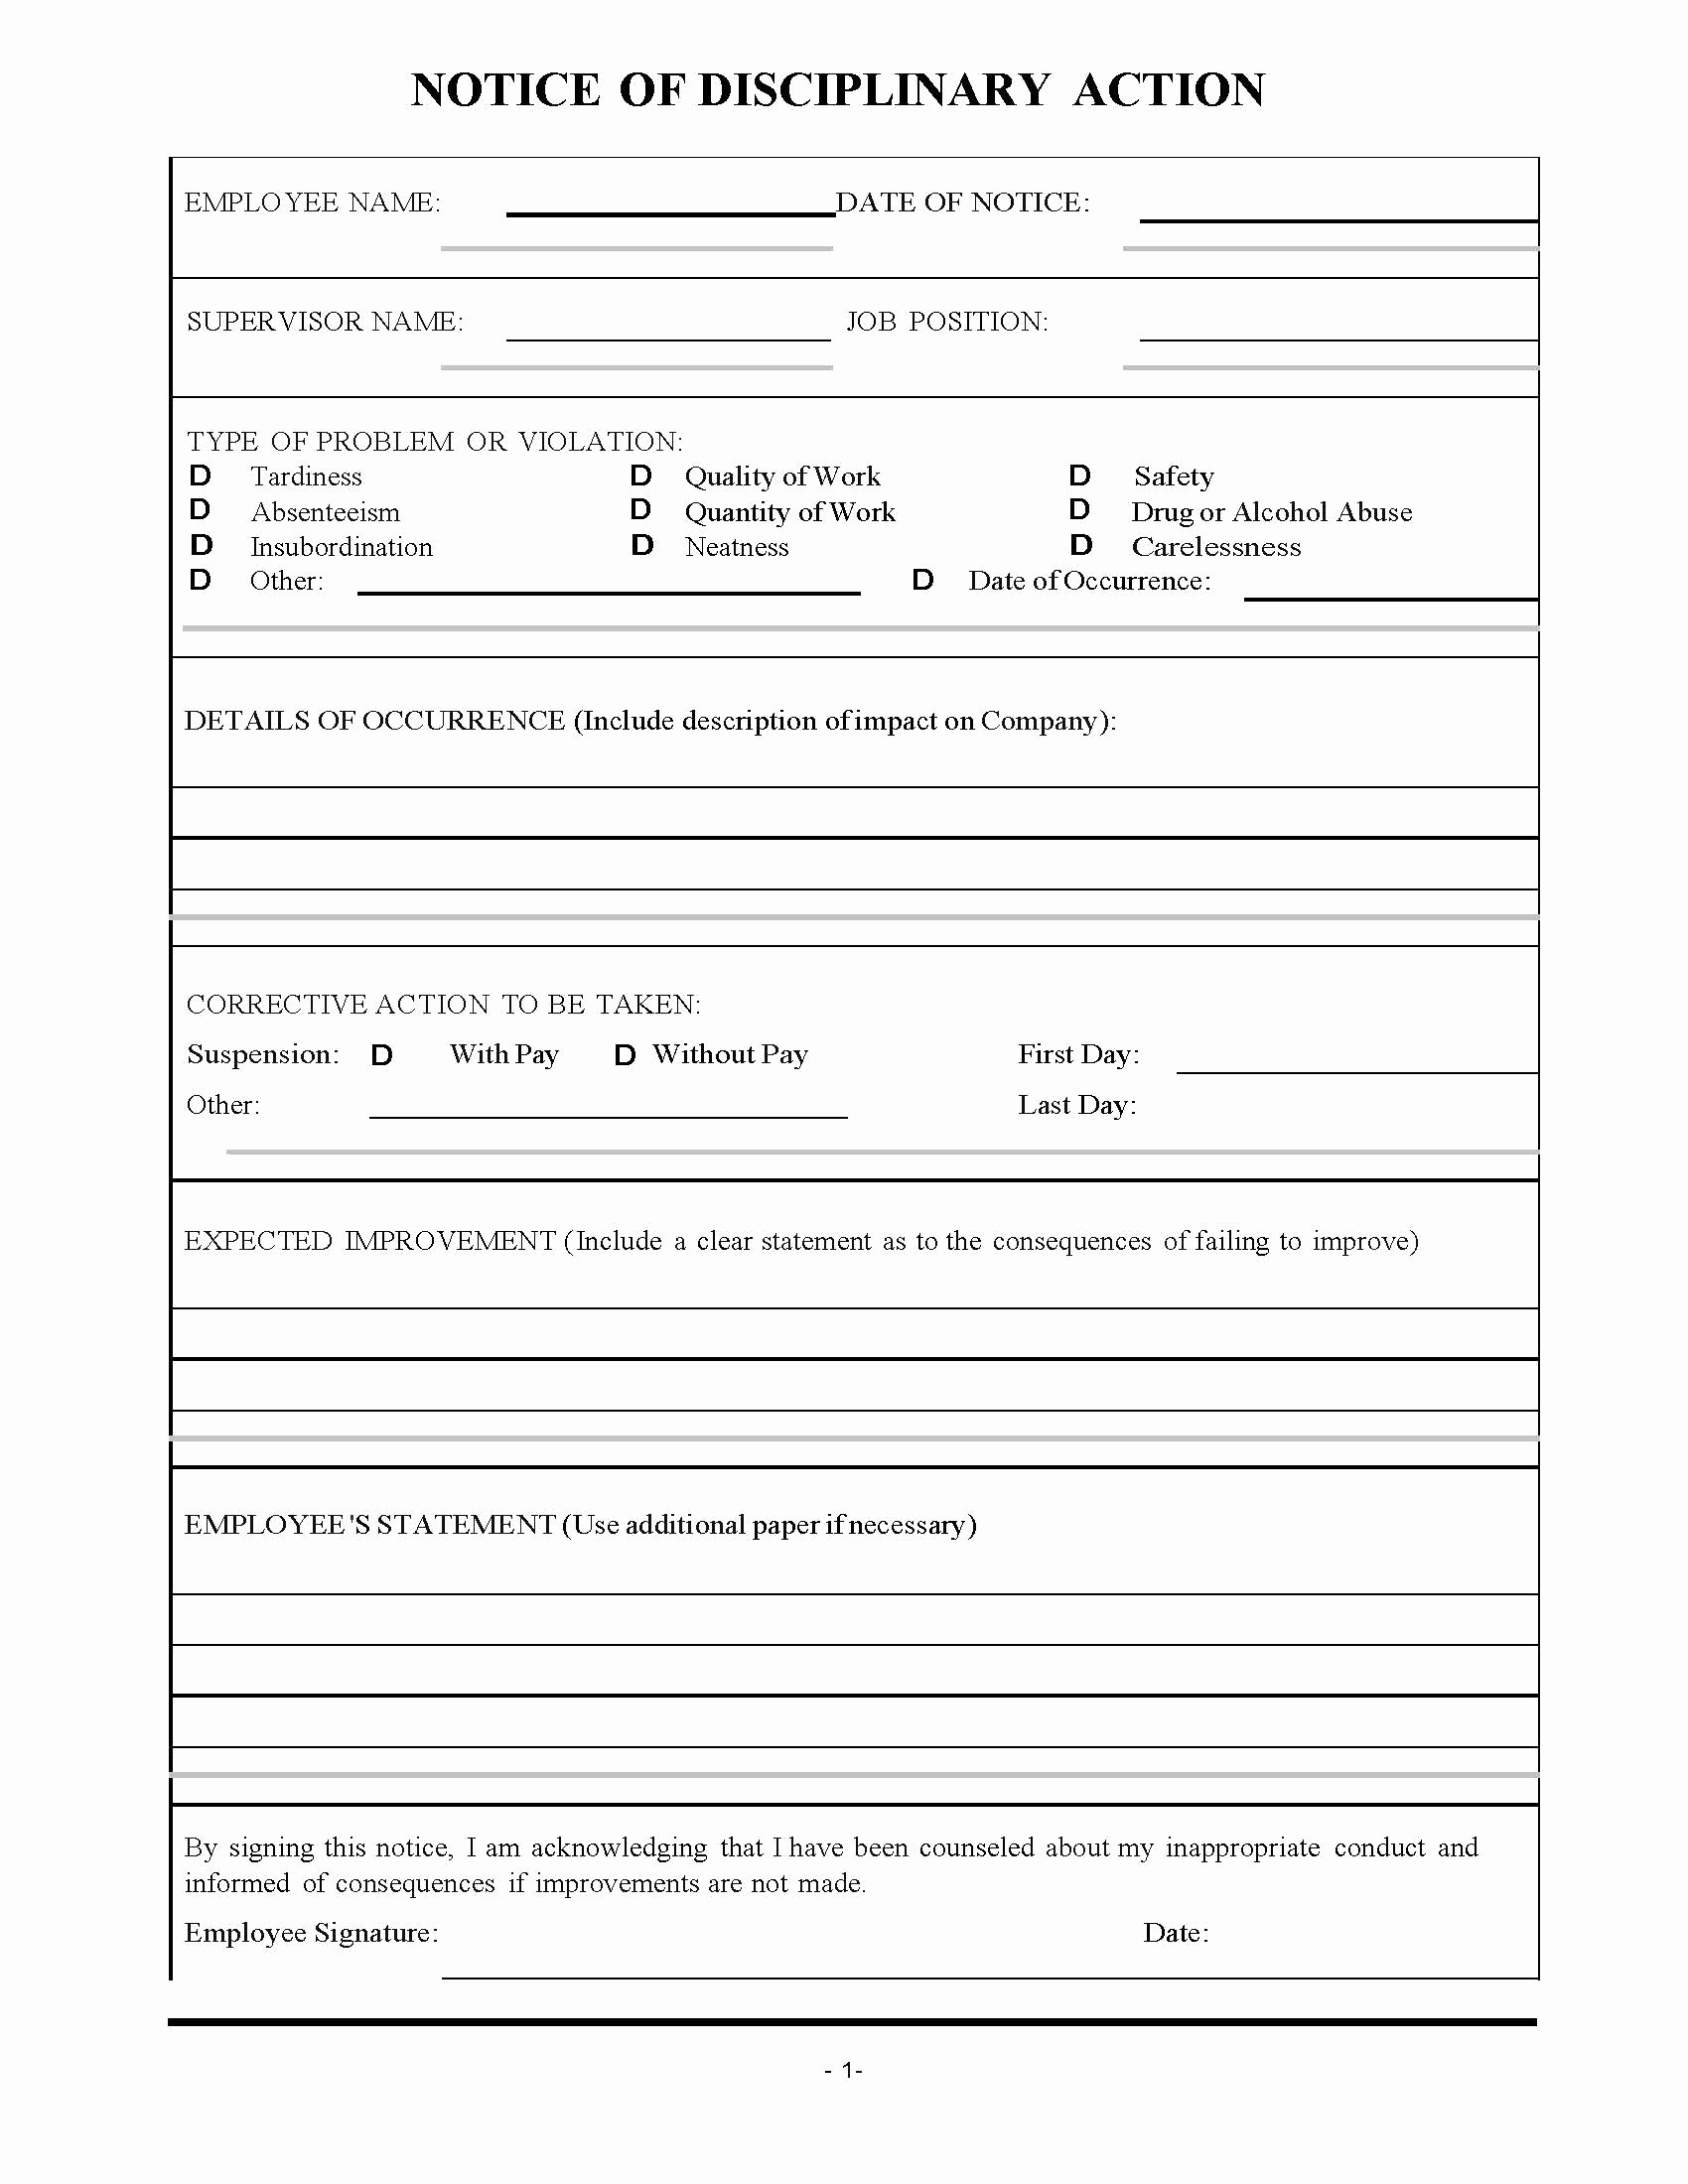 Employee Disciplinary Action form Lovely Restaurant Employee Disciplinary Action form